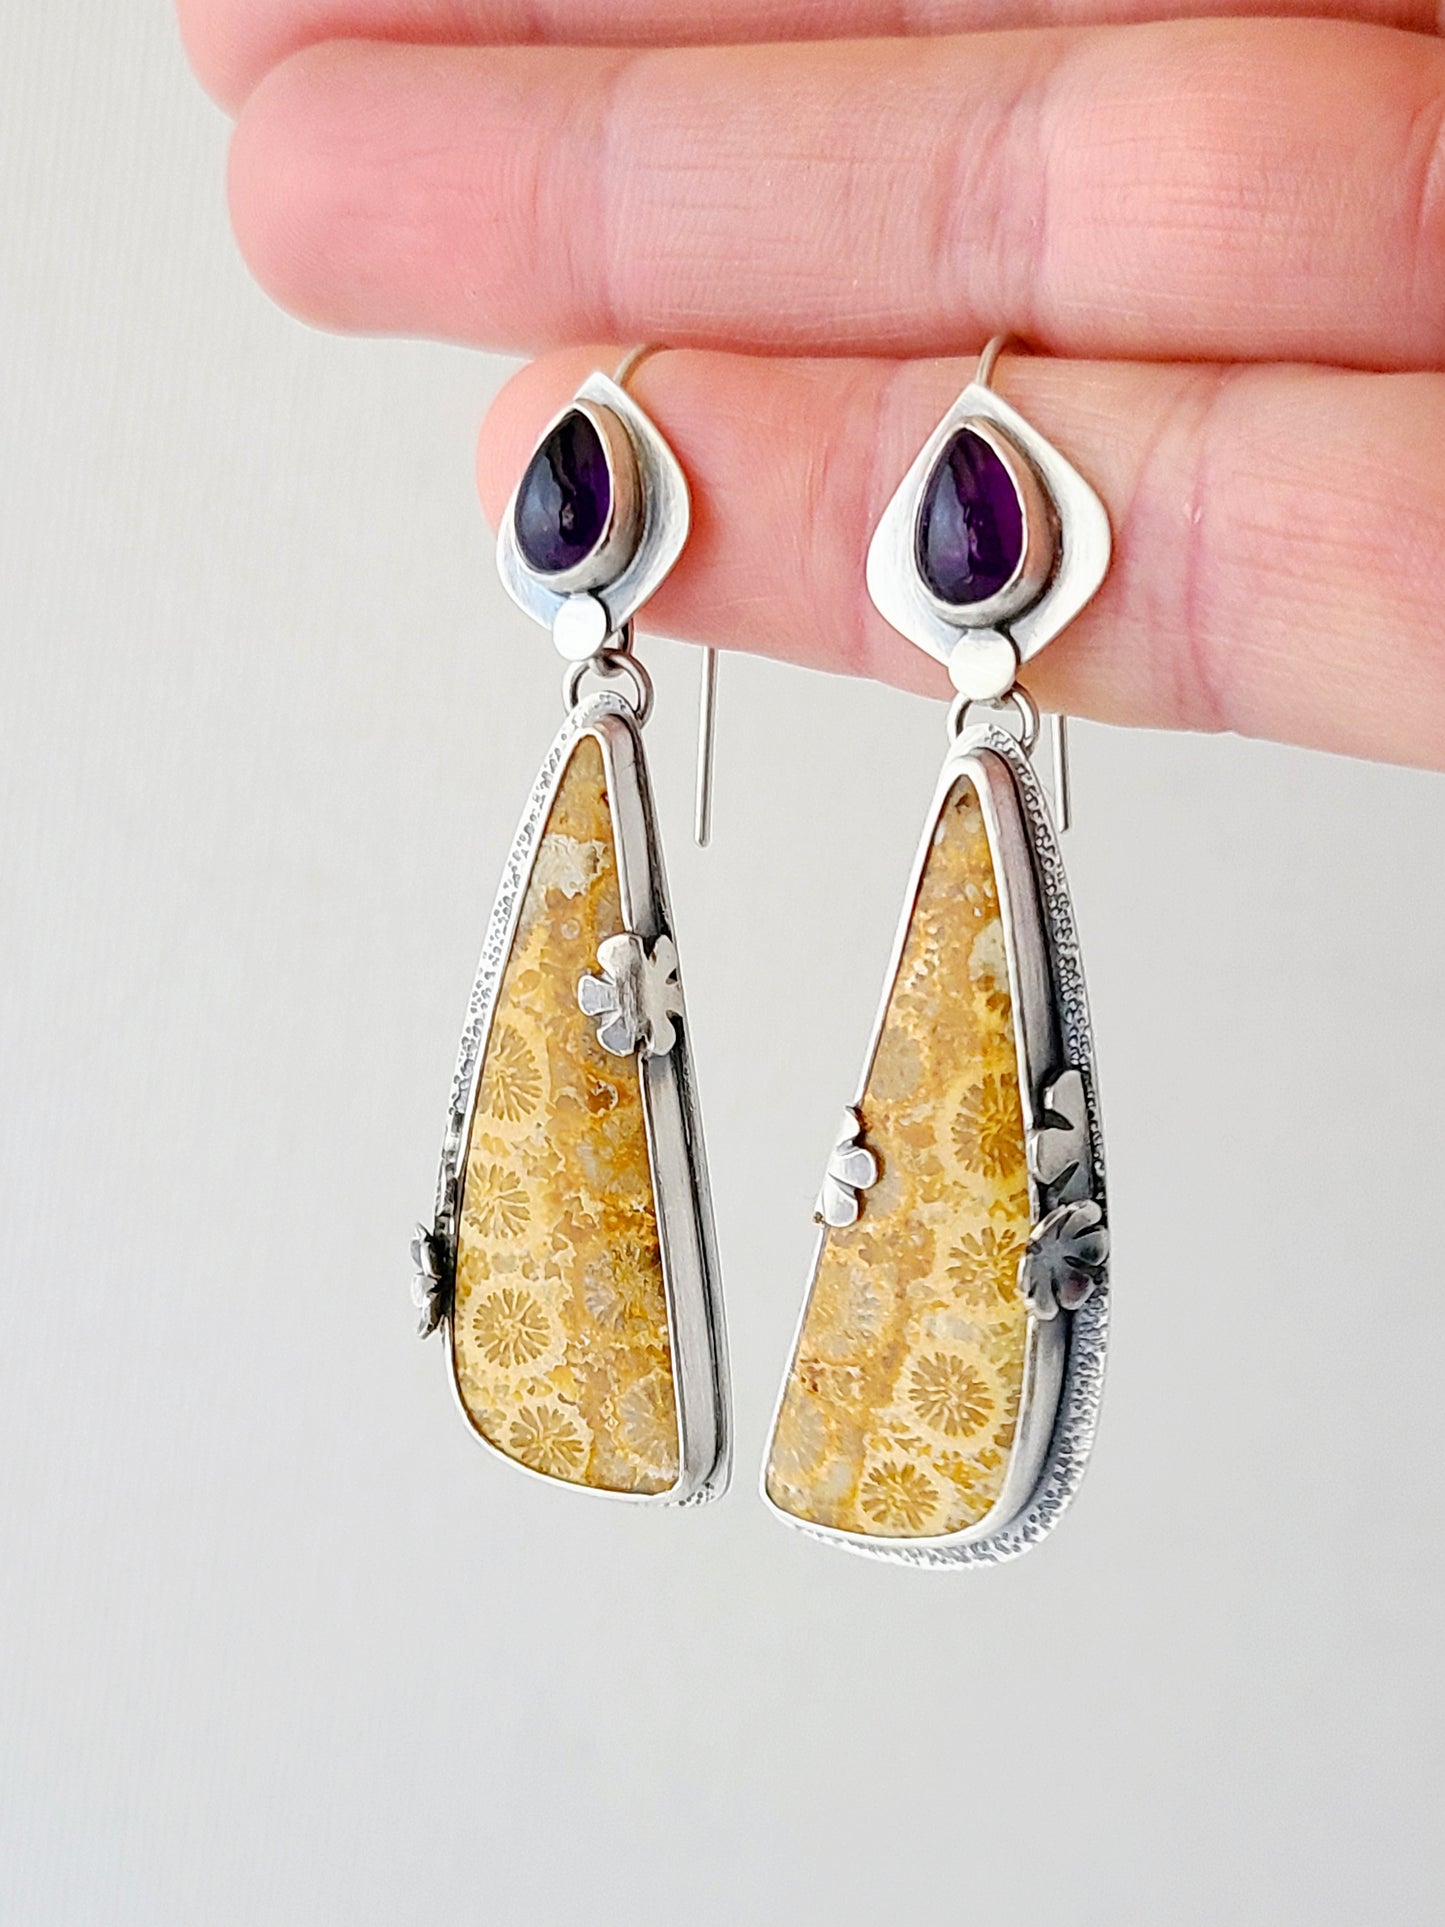 Fossil Flower earrings-Fossilized Coral with Amethyst